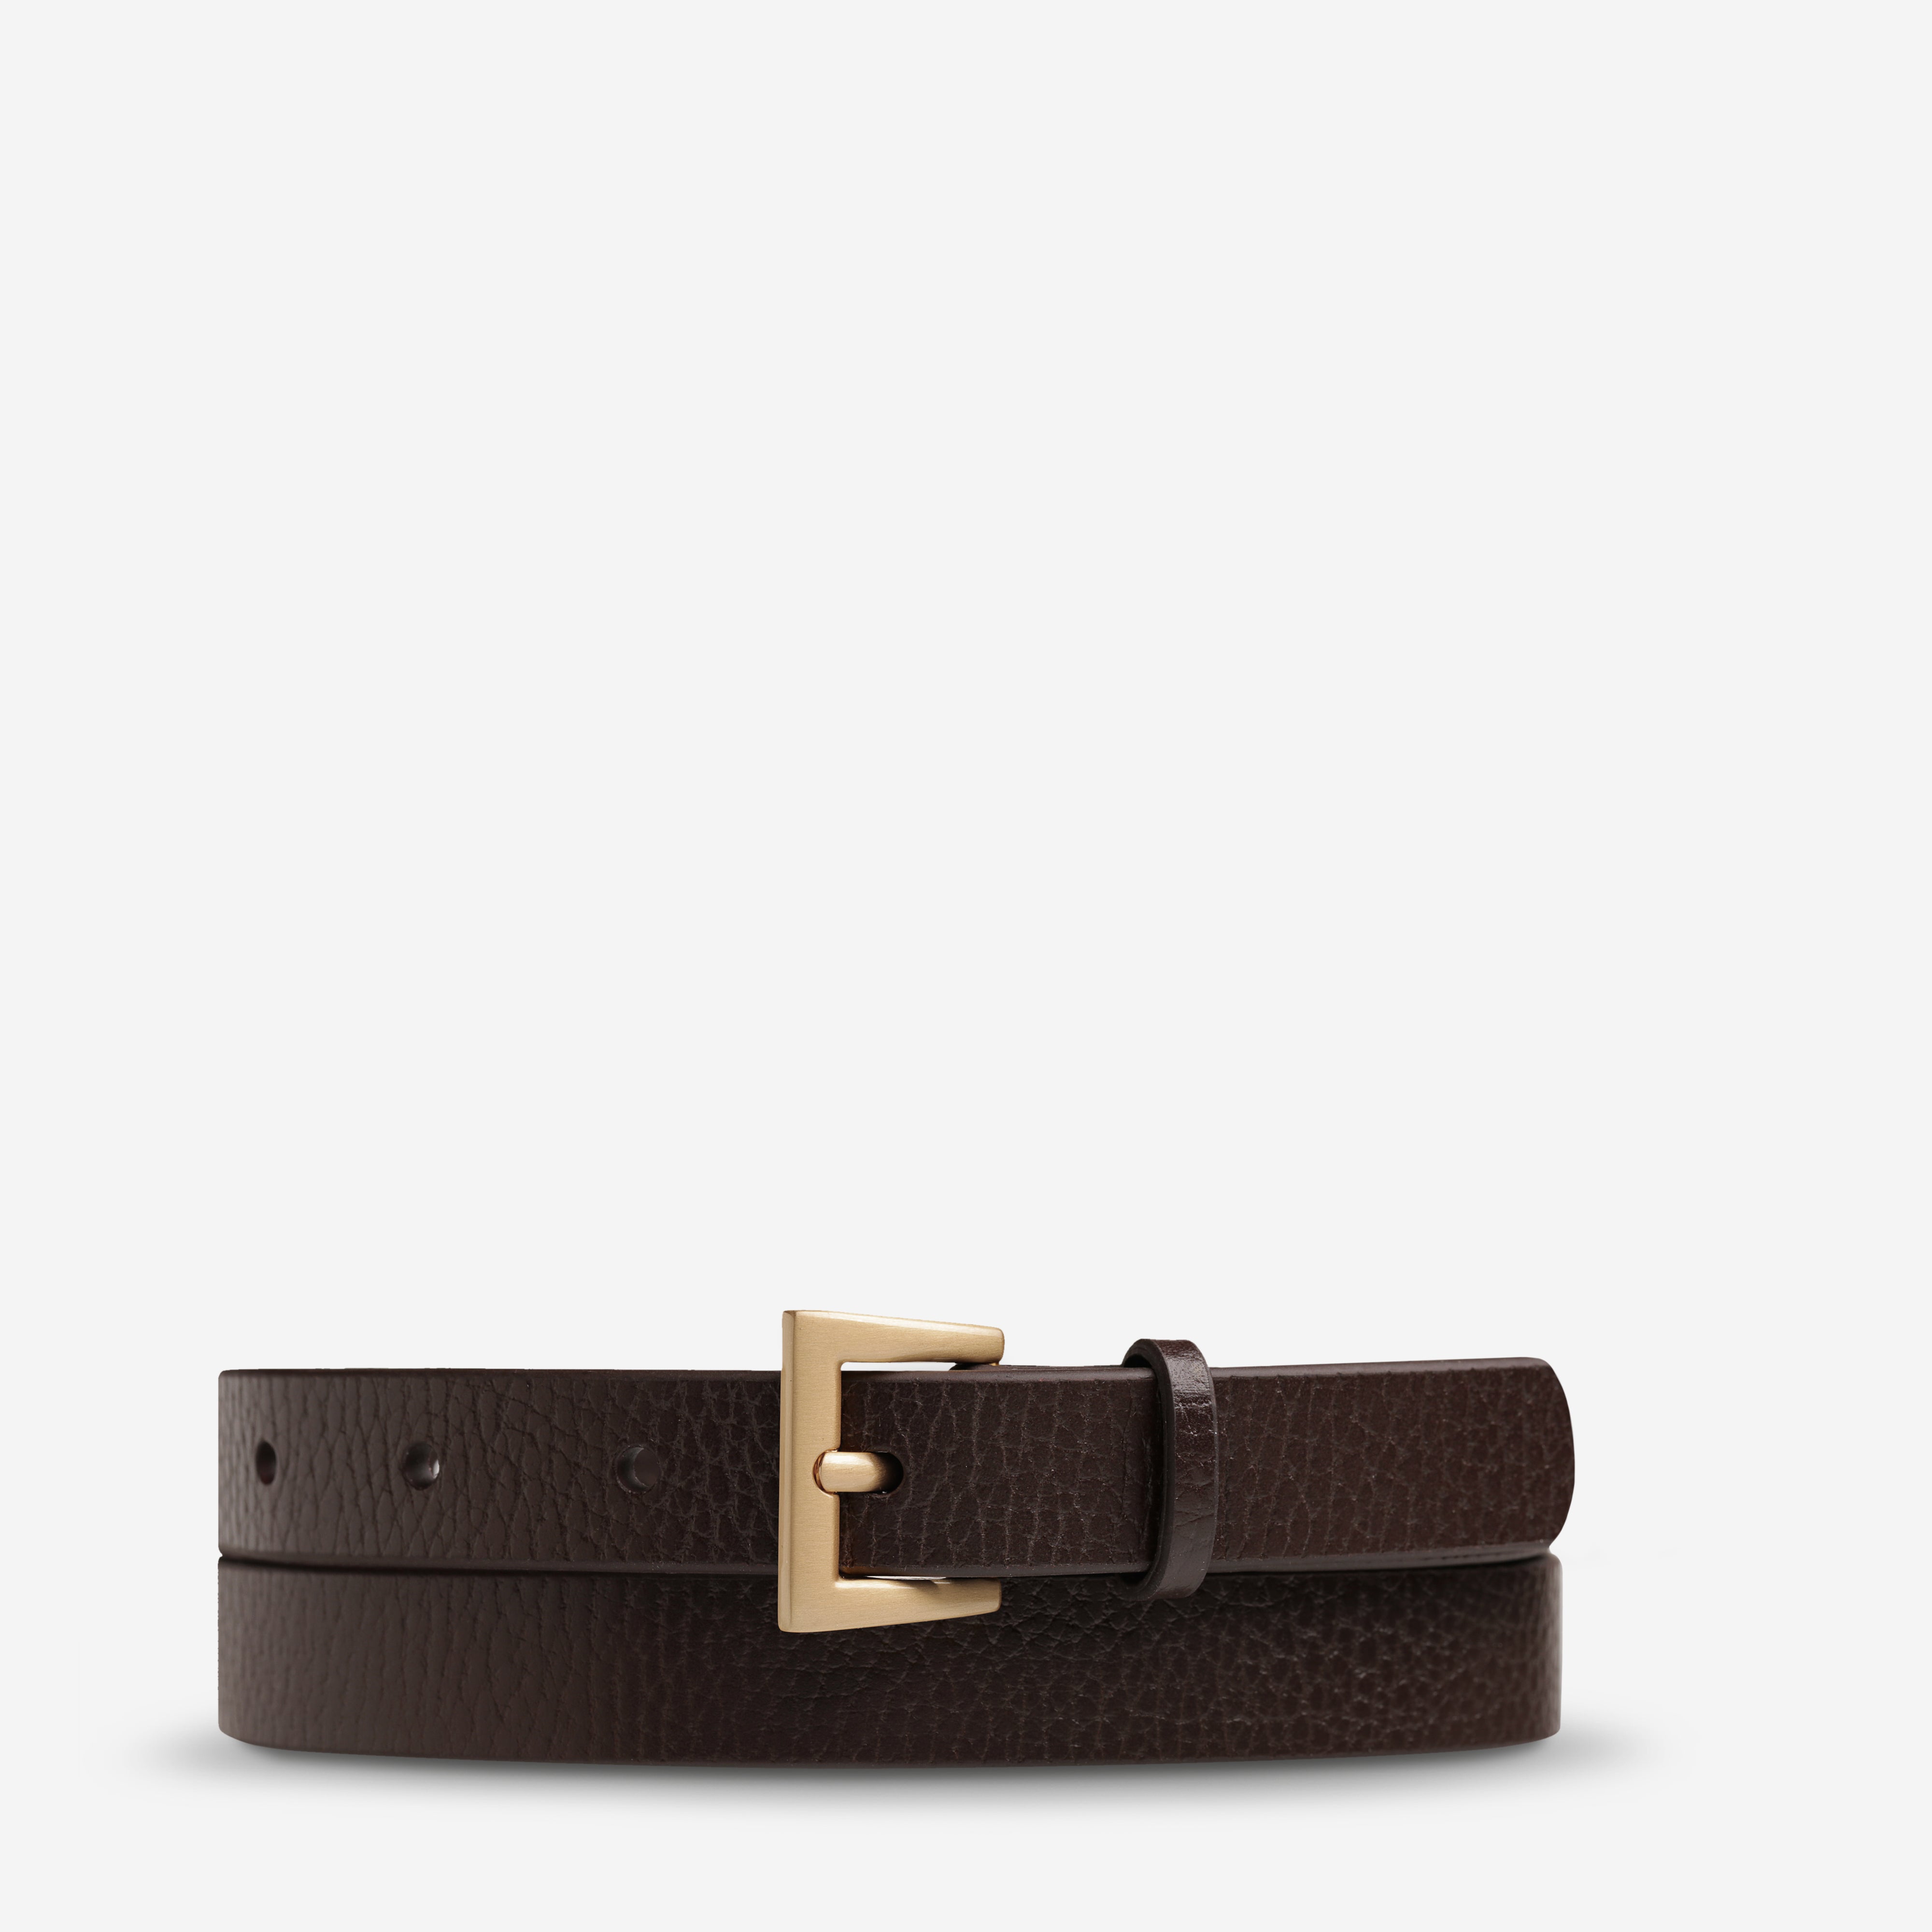 Status Anxiety ‘Part of Me’ Women's Leather Belt Choc / Gold